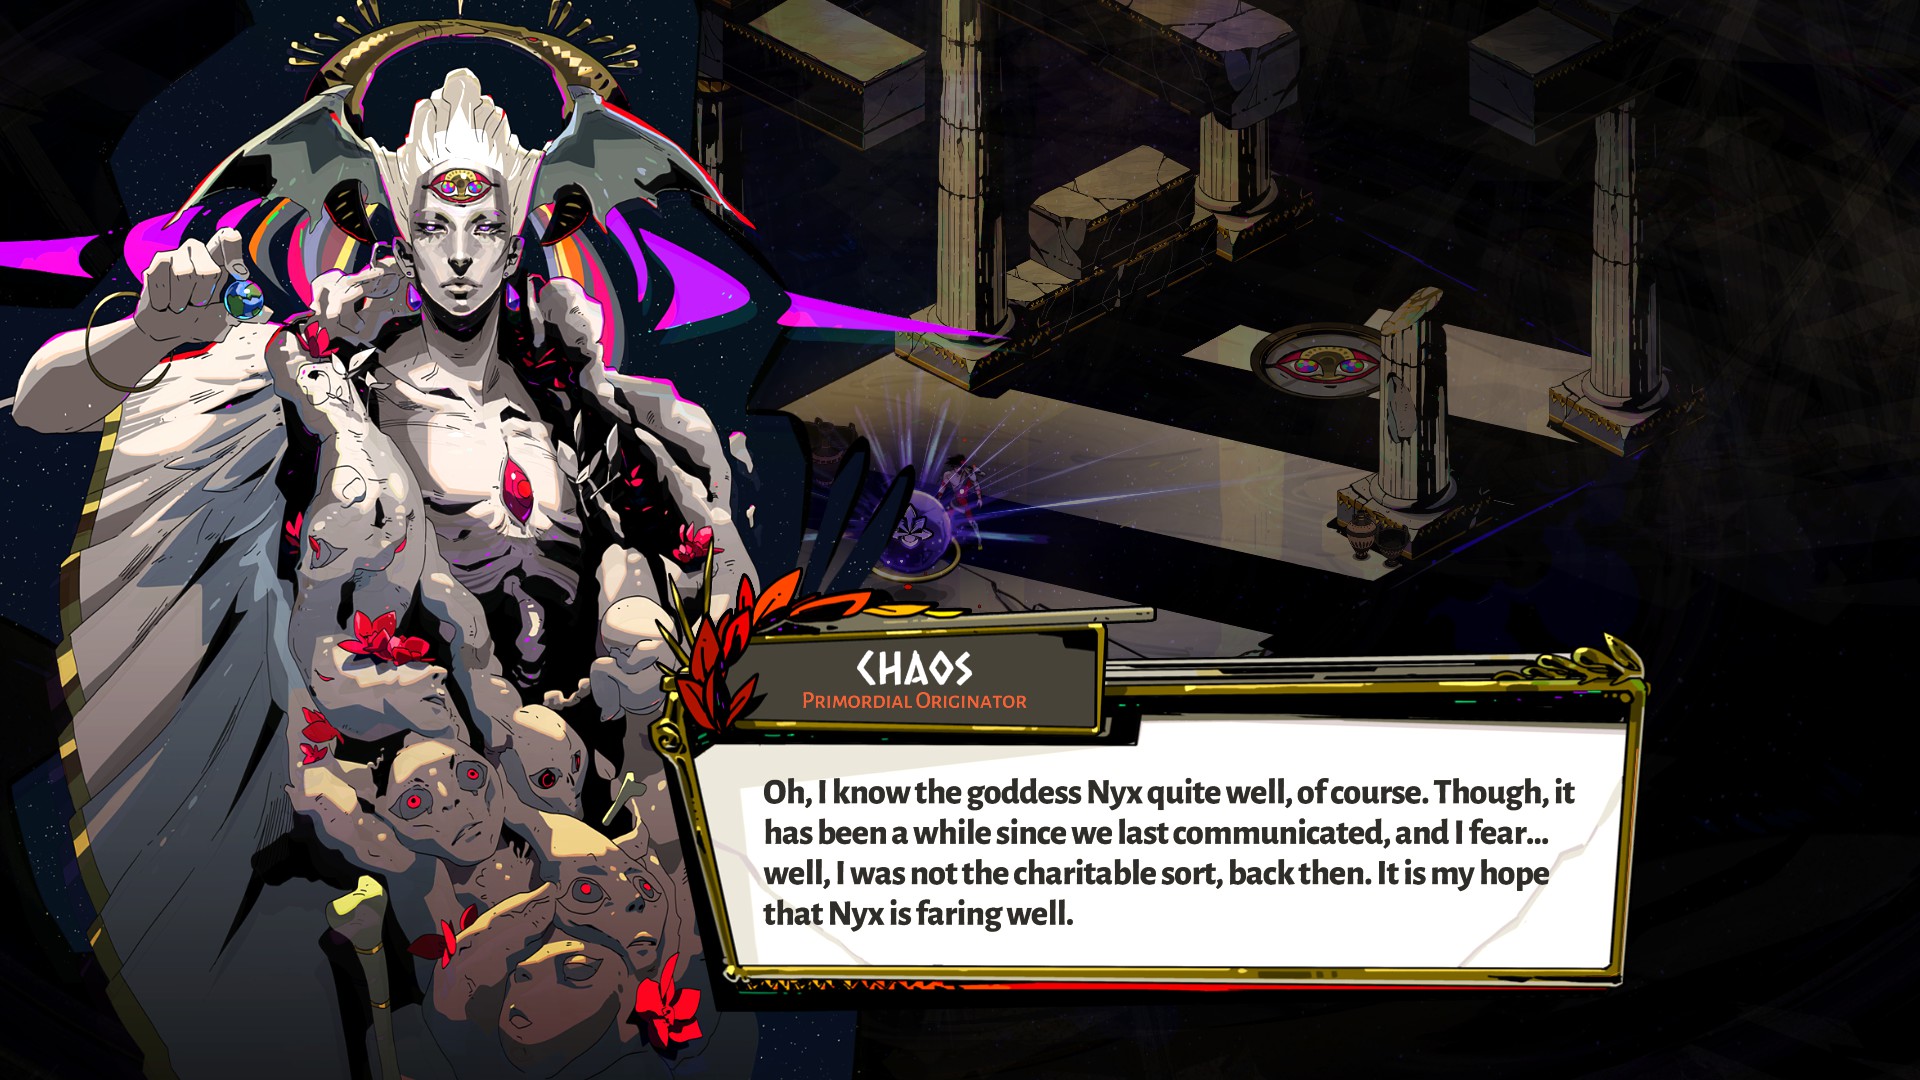 Image of Chaos from Hades, talking about Nyx.